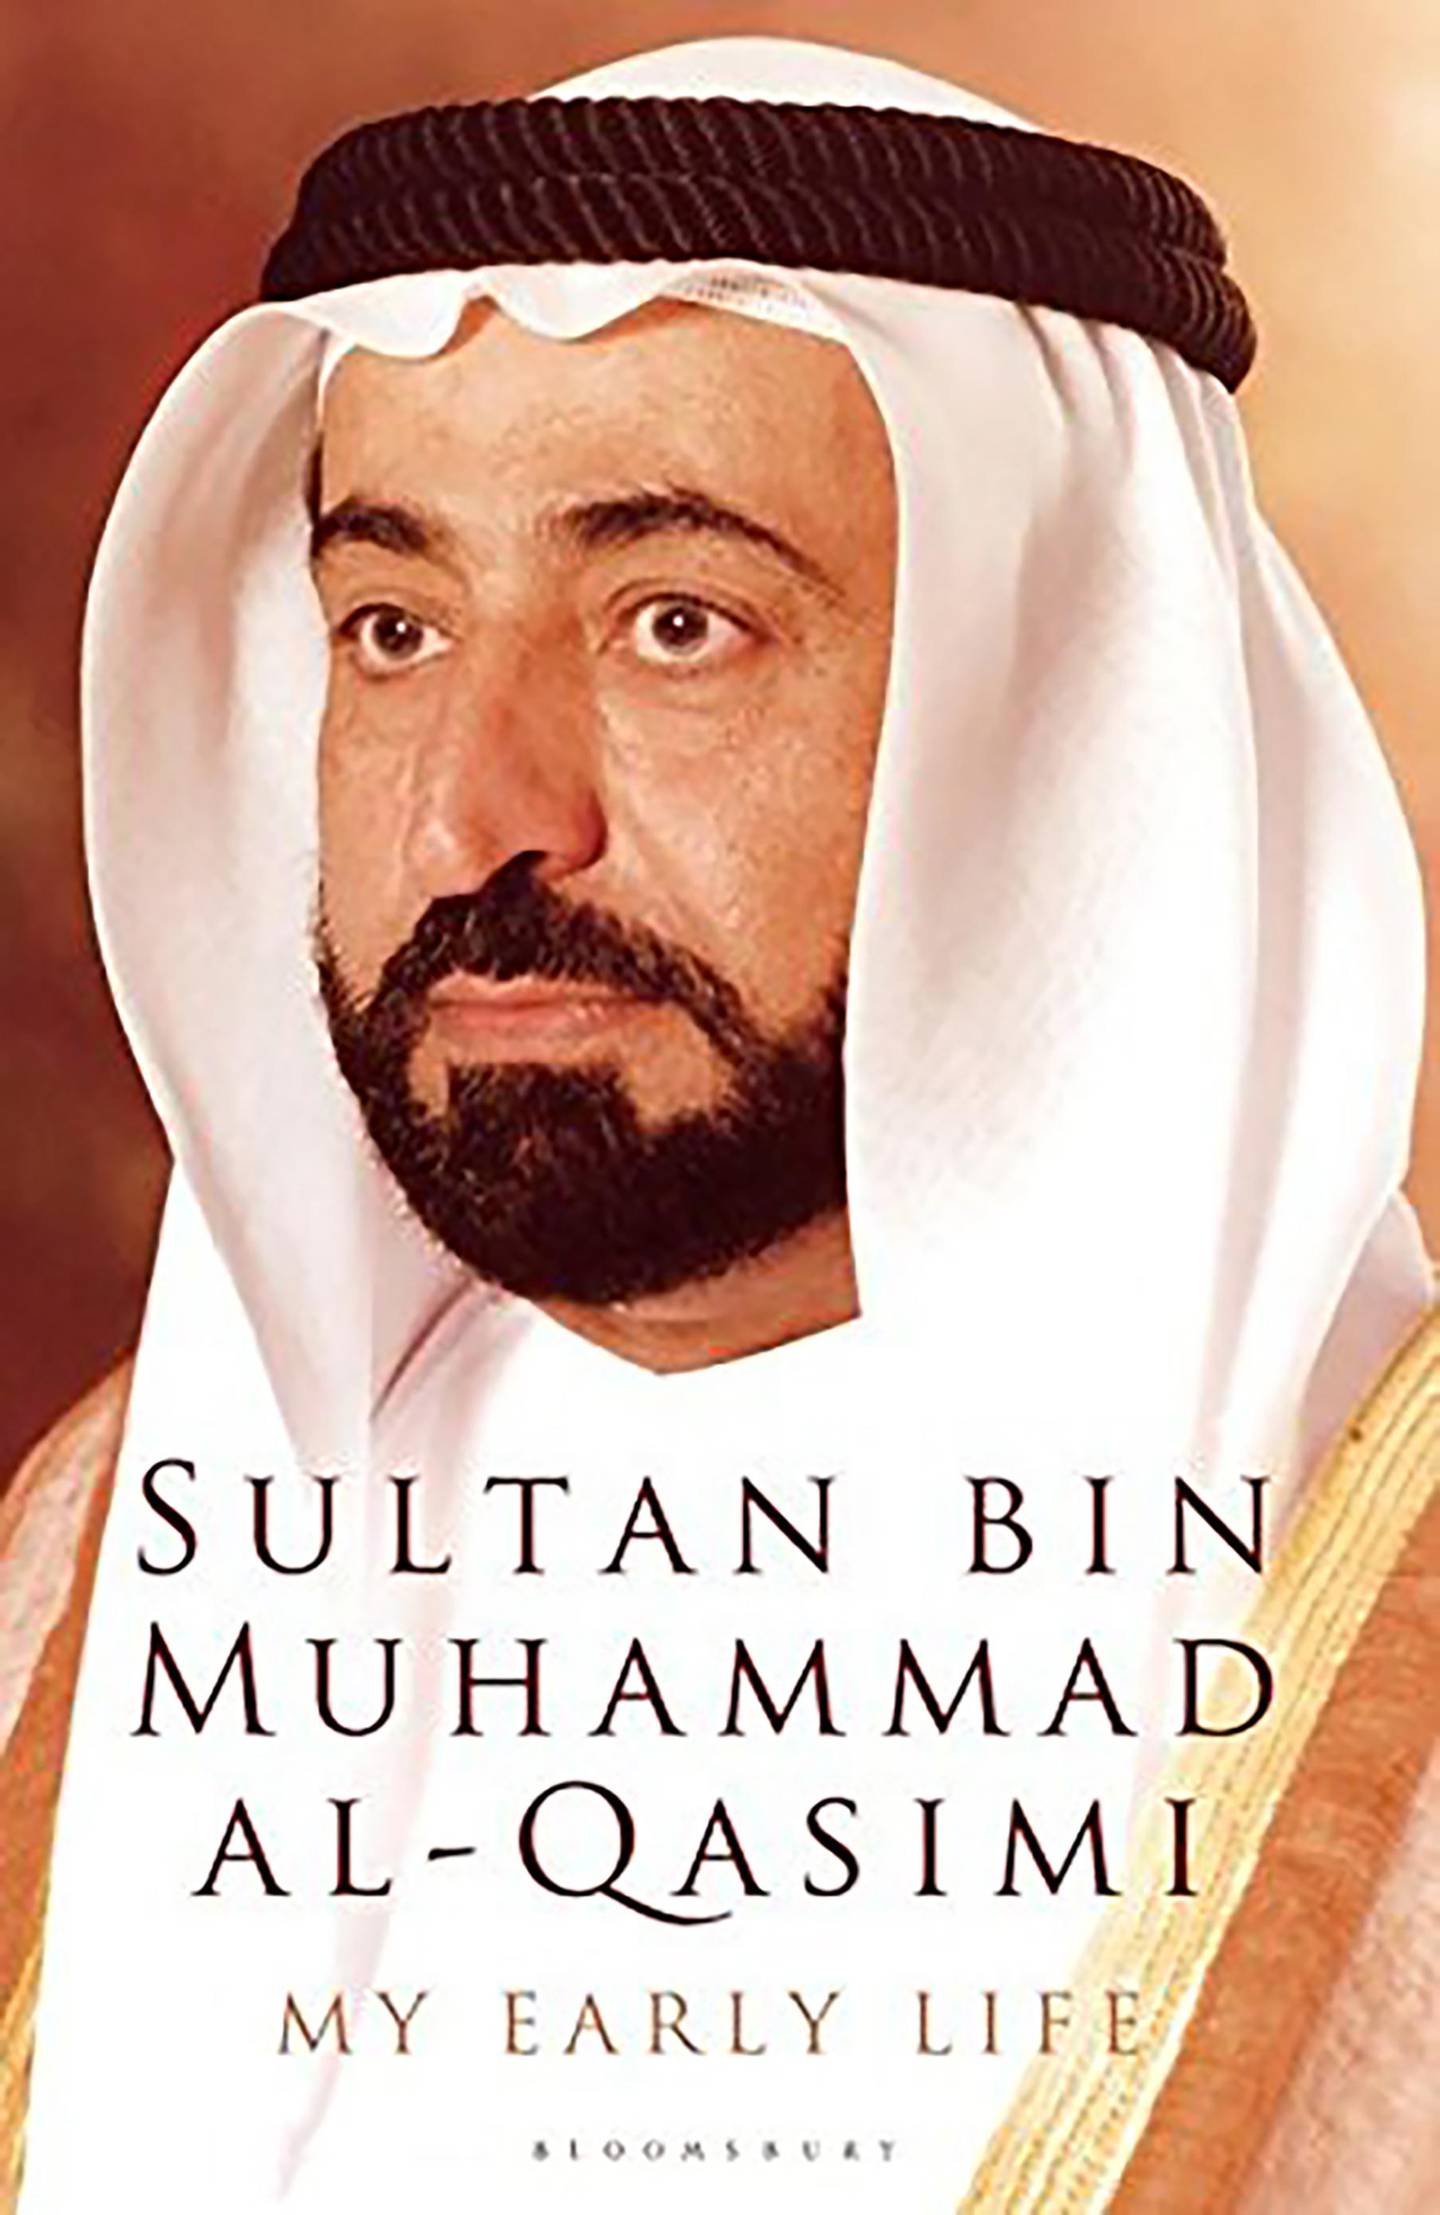 in 'My Early Life: Sultan Bin Muhammad Al-Qasimi' (2009), the Sharjah Ruler paints an evocative picture of a changing Arab world.